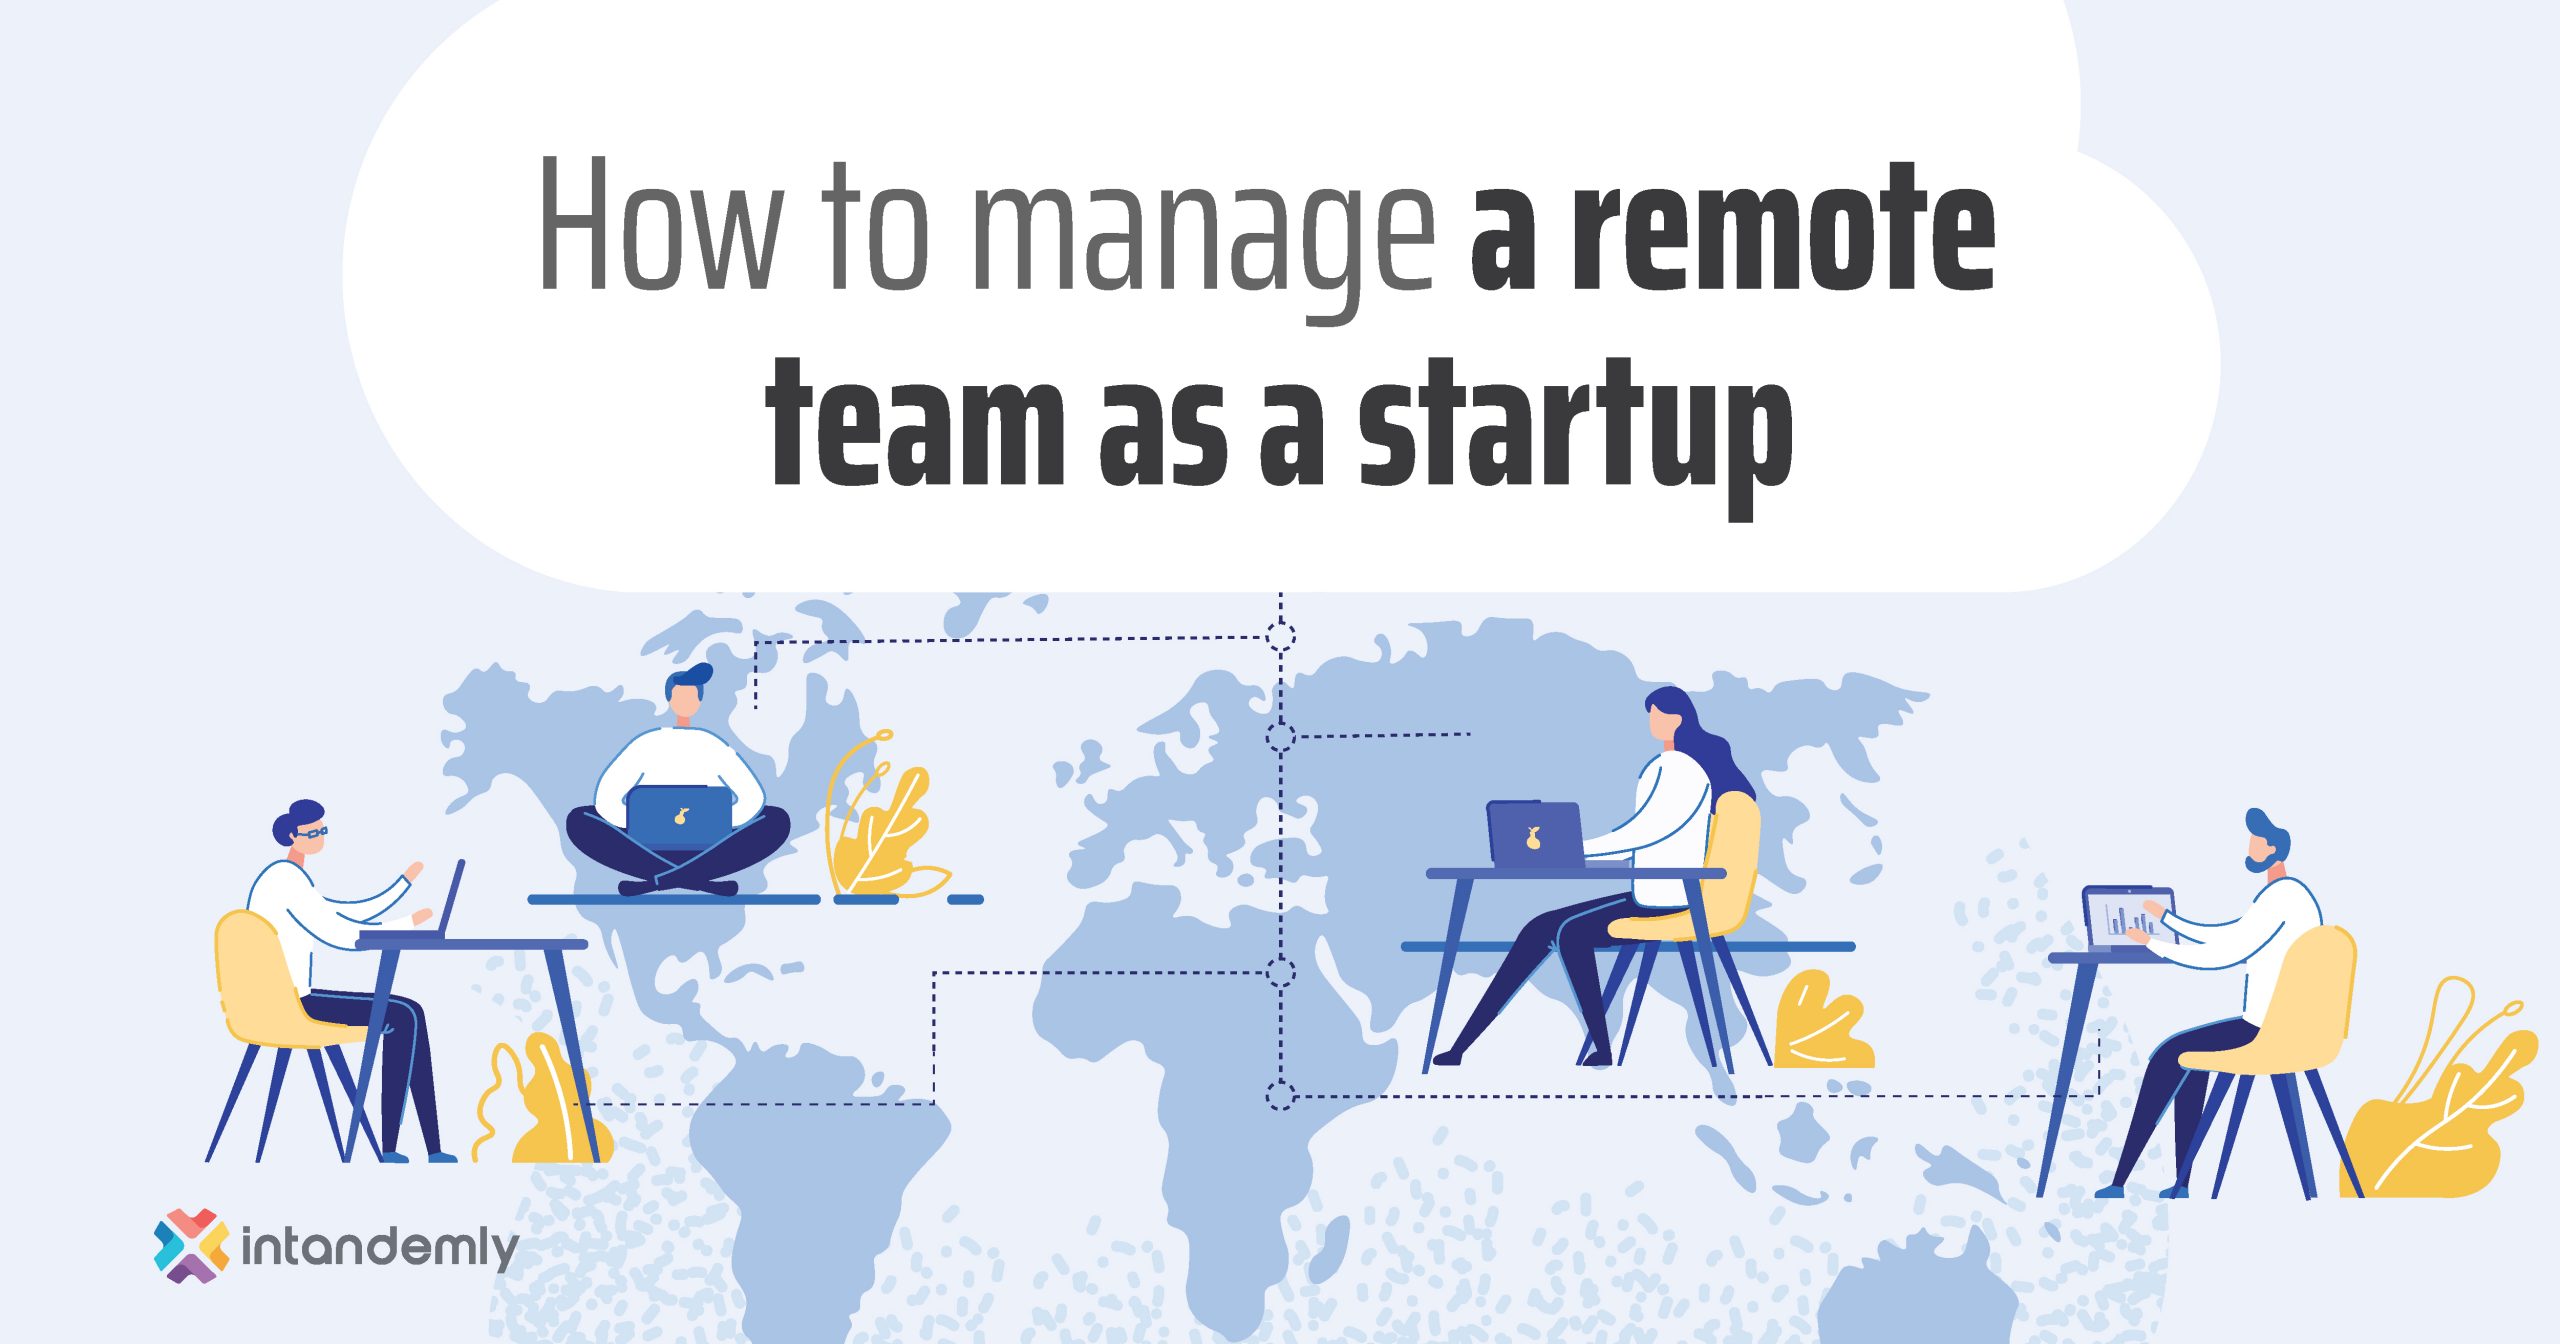 How To Manage a Remote Team As a Startup